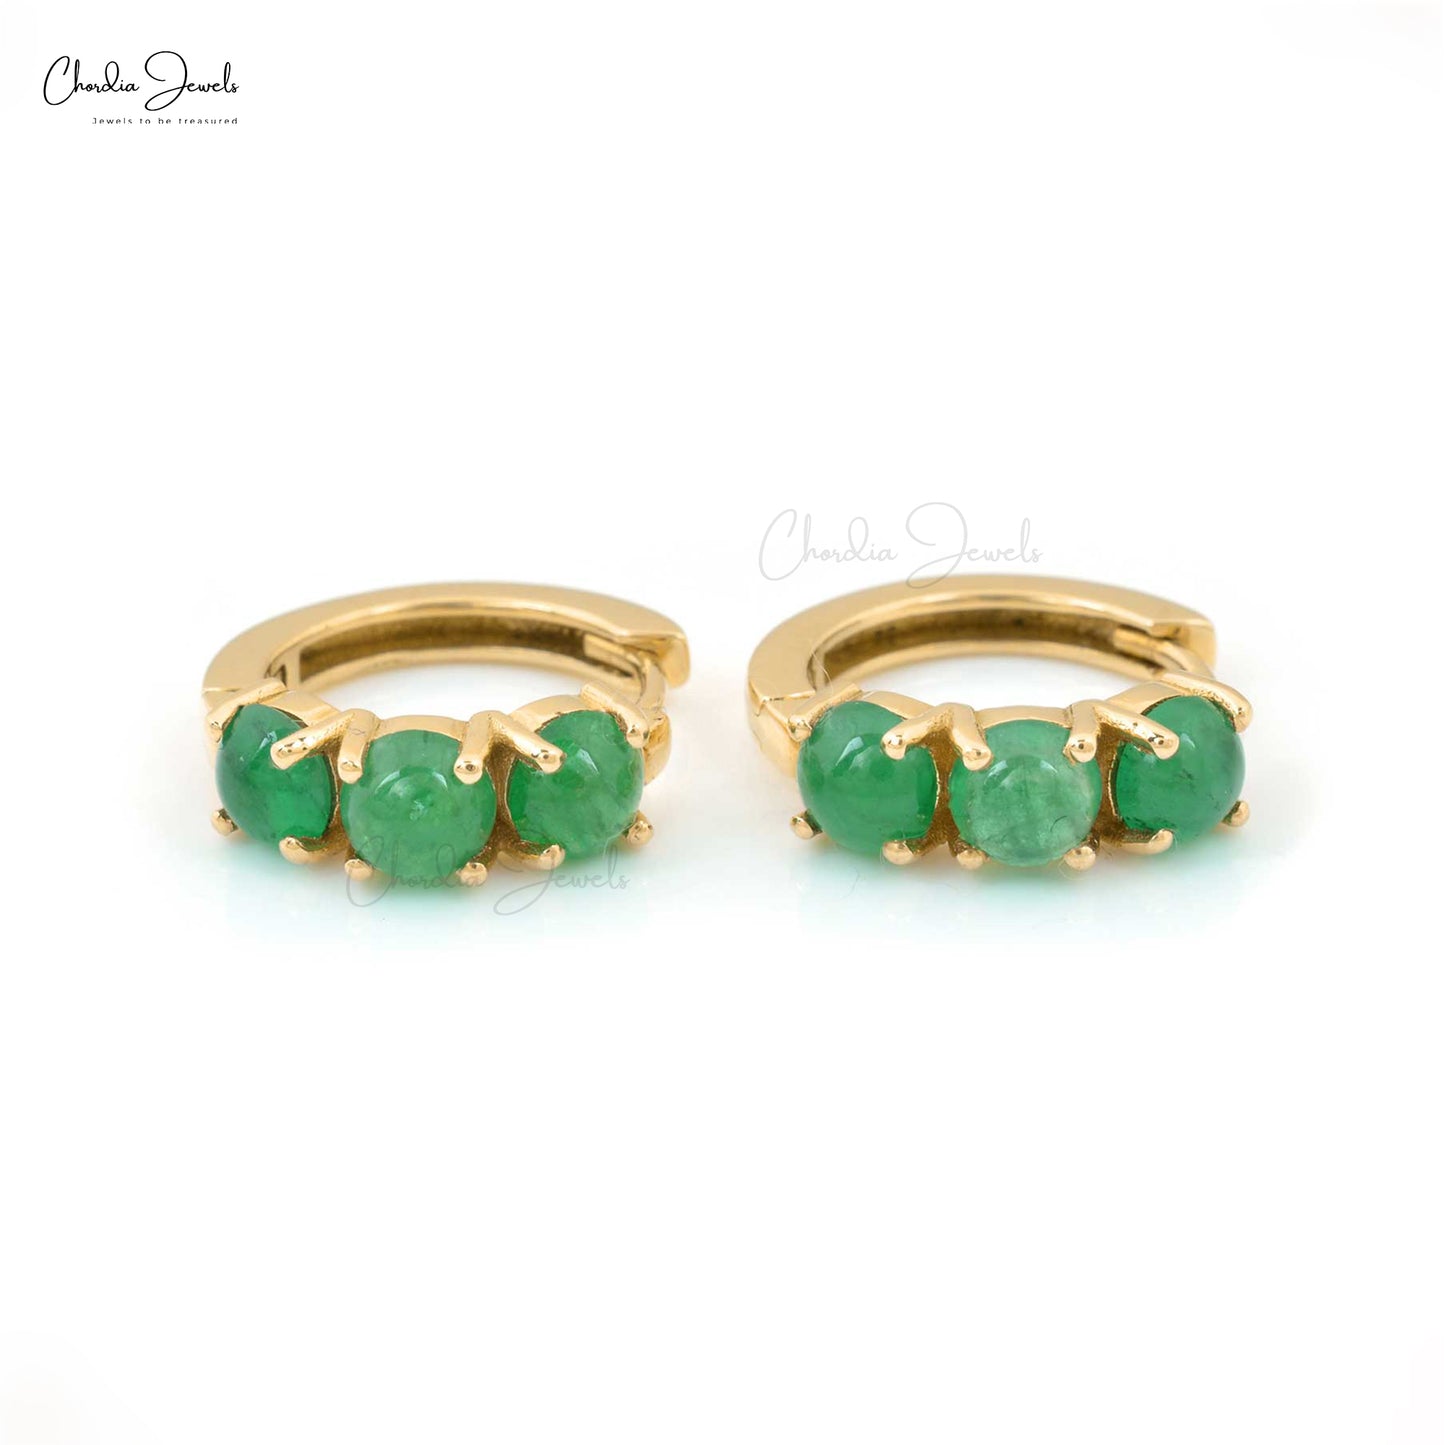 Load image into Gallery viewer, Natural Emerald Huggie Hoops Earring 4mm Round Cabochon Latch Back Earrings 14k Real Yellow Gold Fine Jewelry For Her
